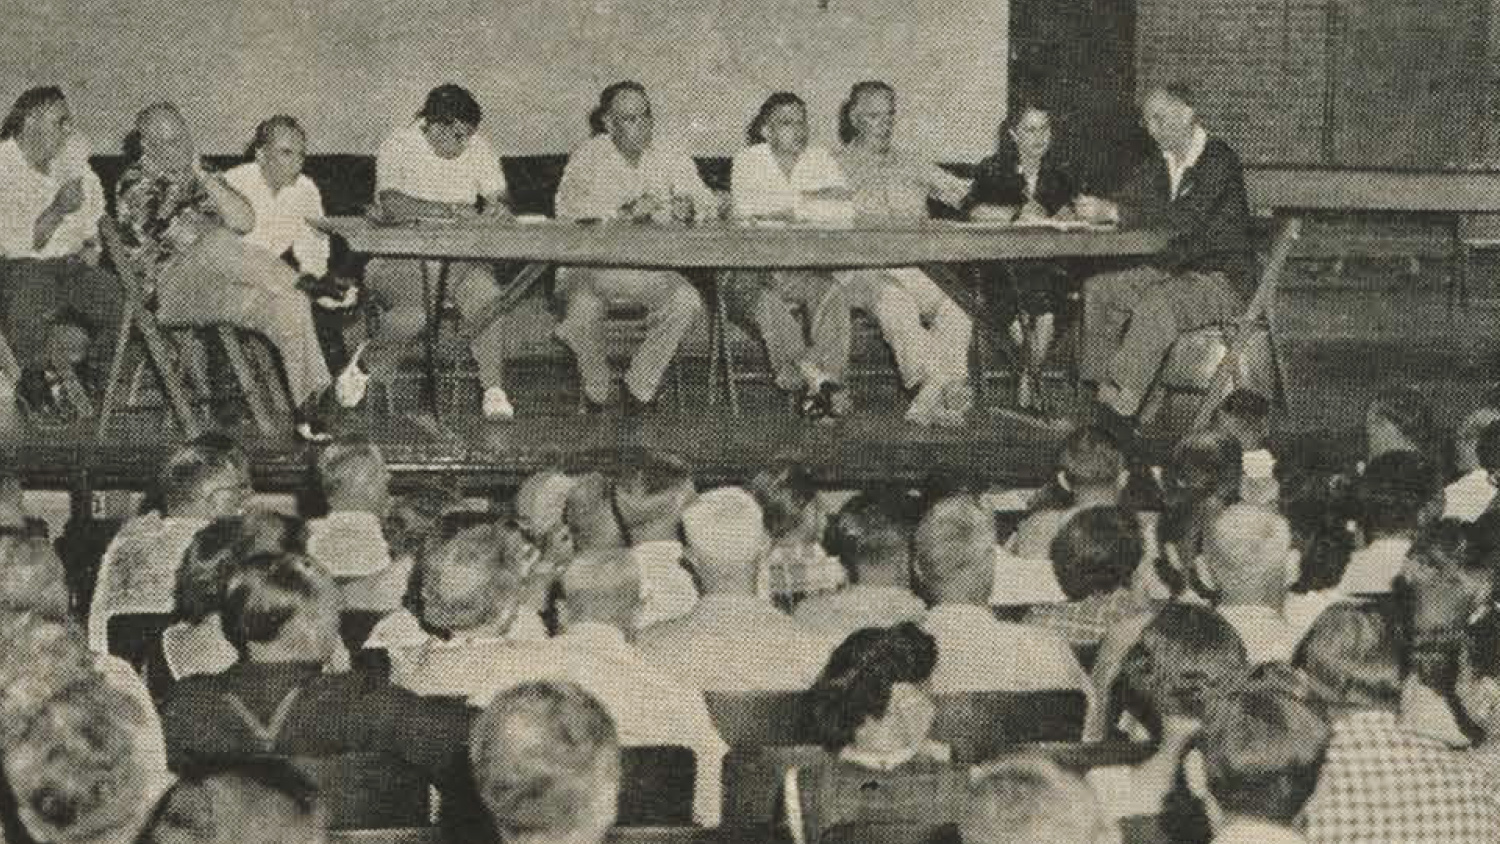 NRA smallbore standing committee meets with competitors at Camp Perry in 1953.